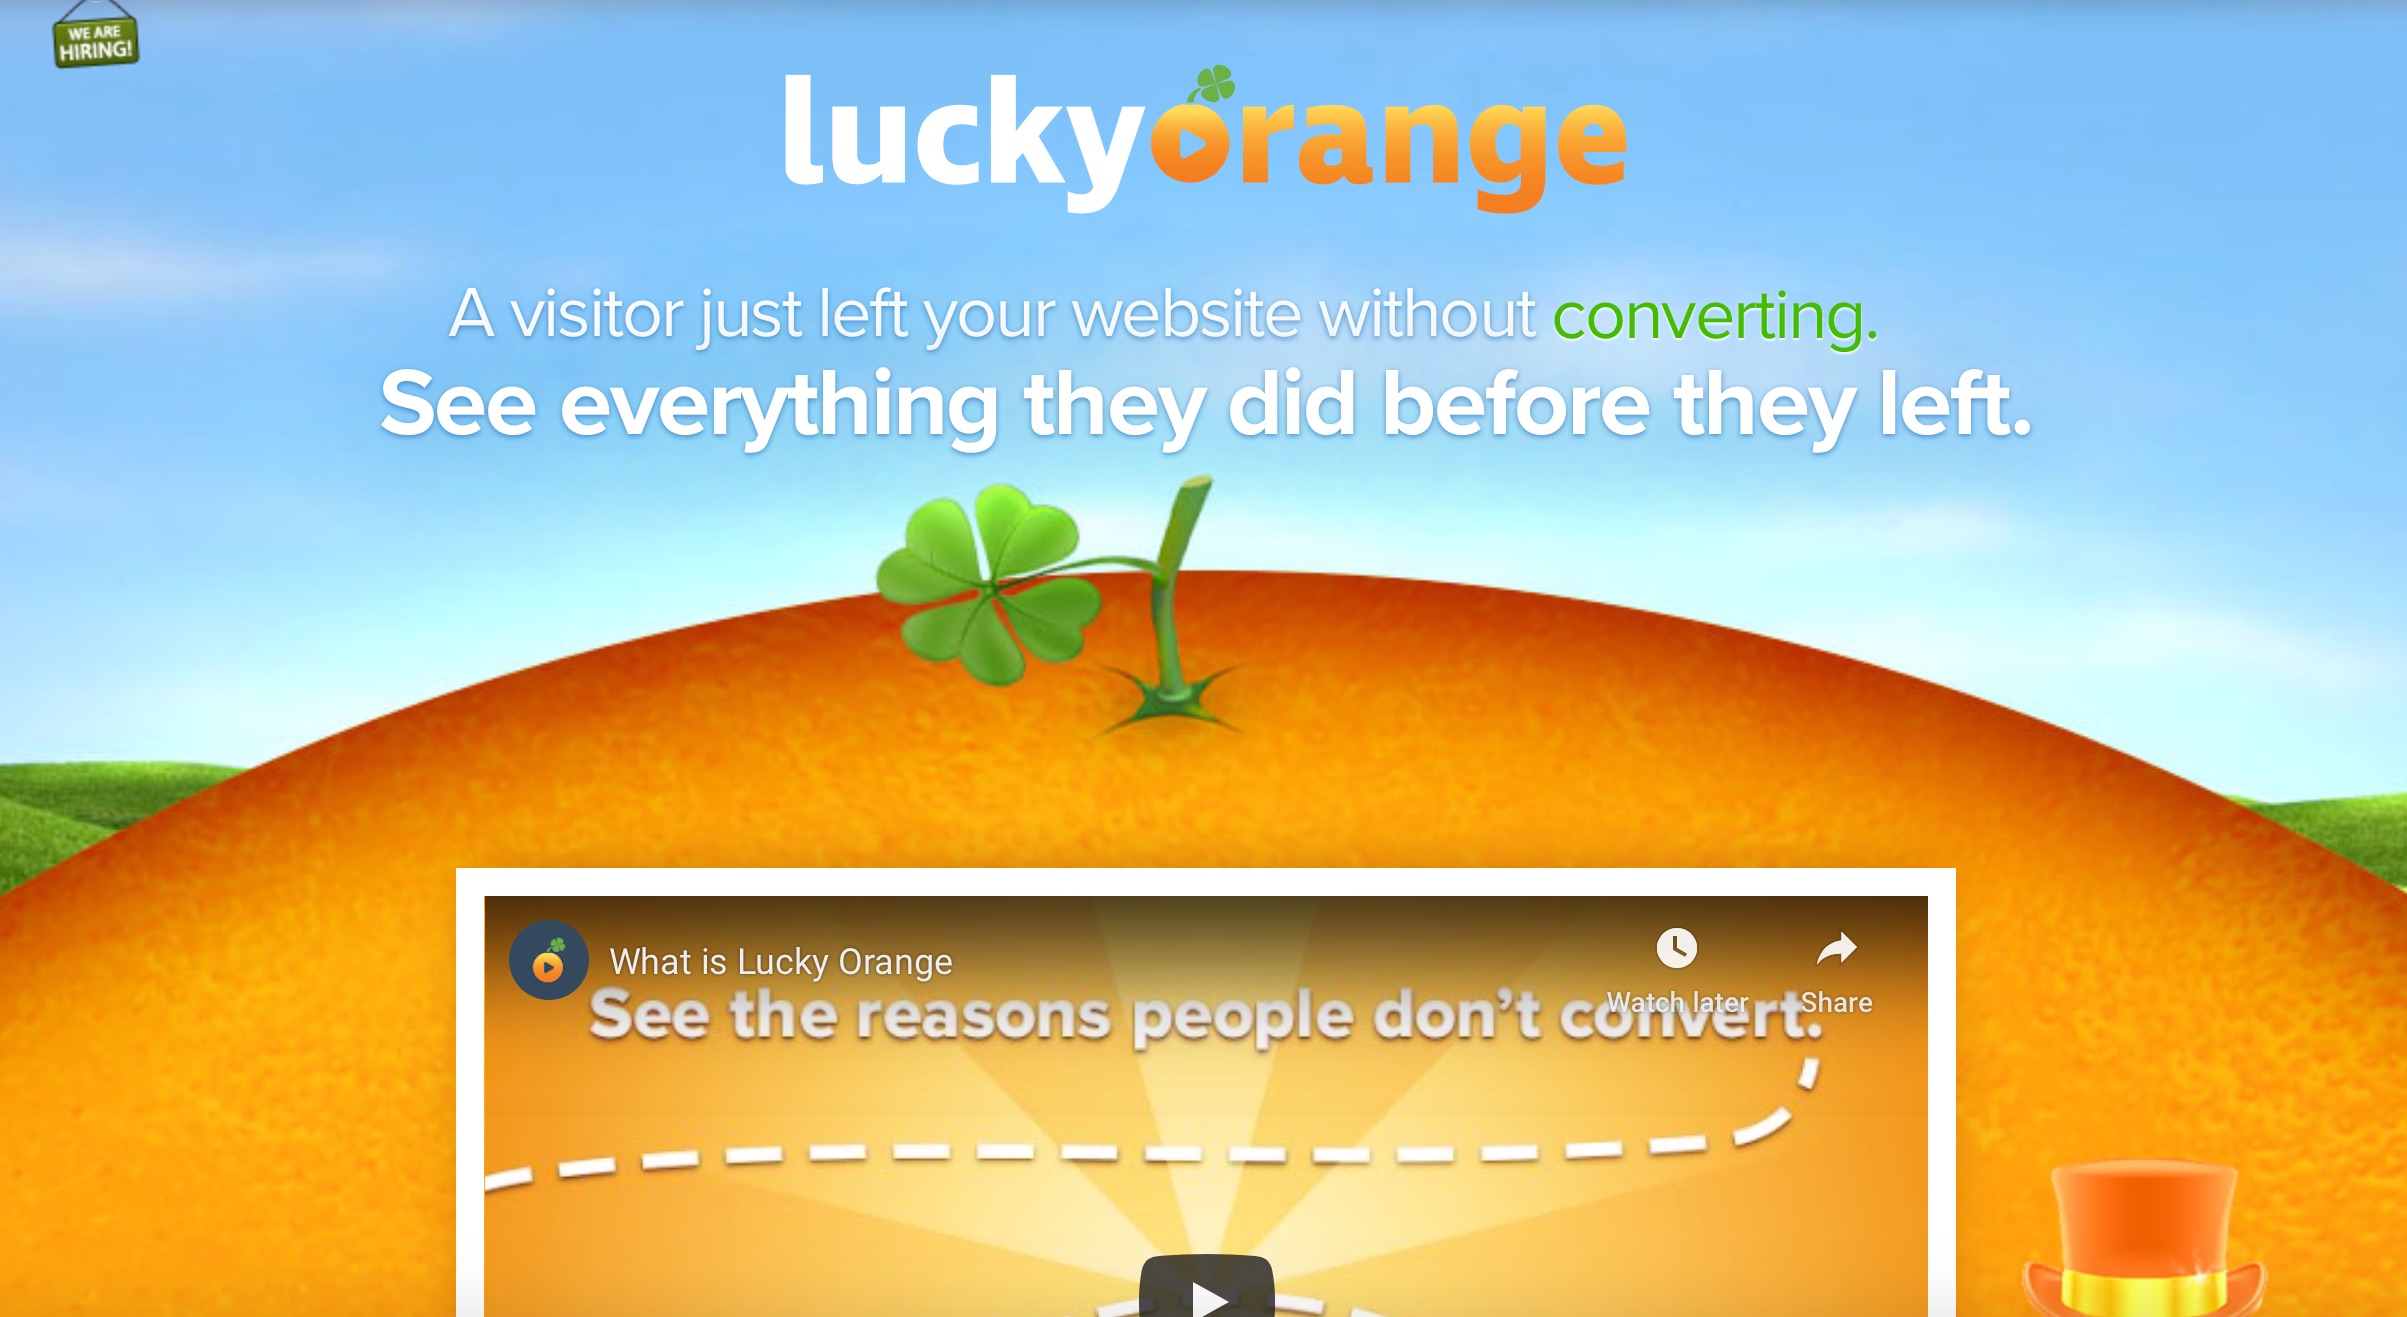 LuckyOrange: A visitor just left your website without converting. See everything they did before they left.